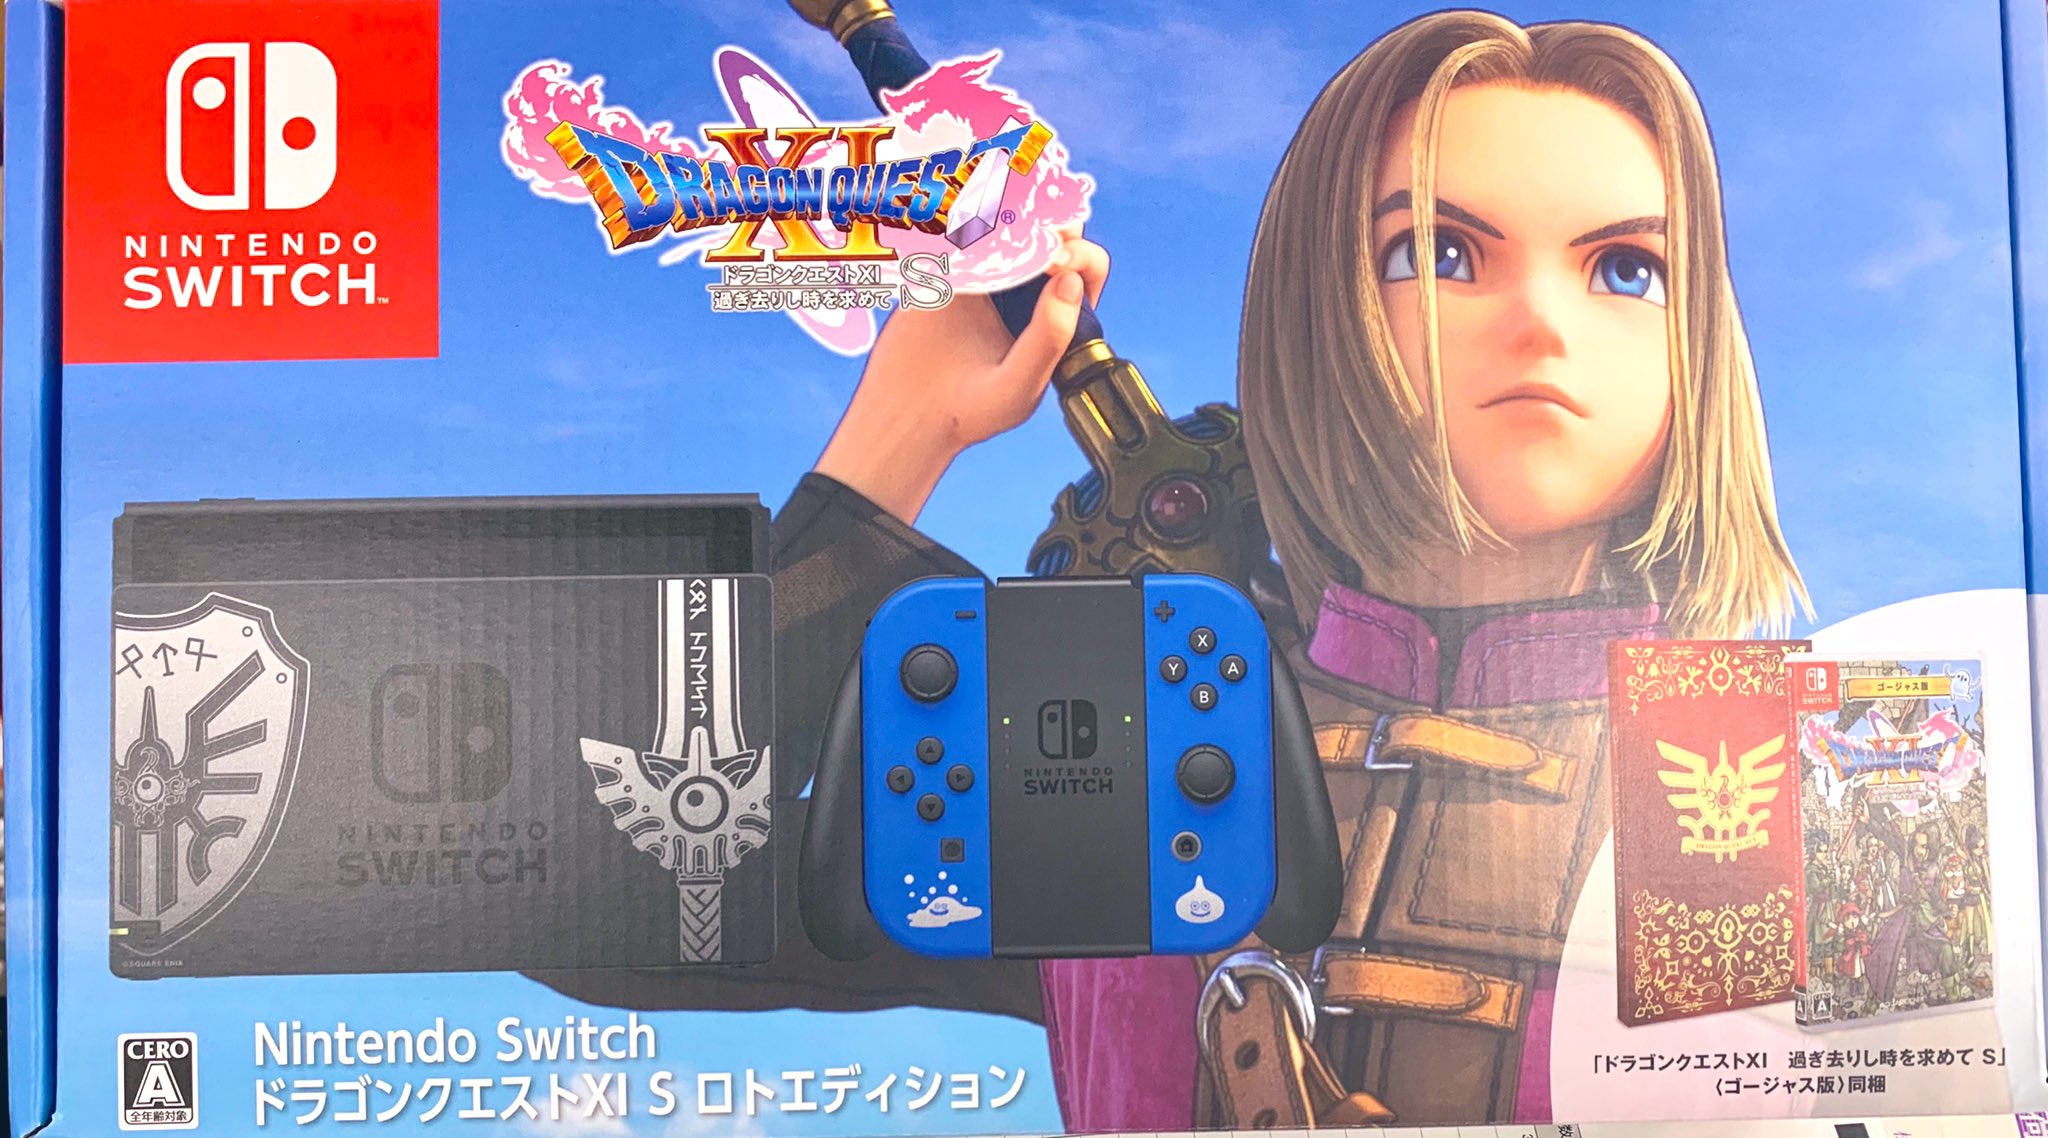 Streng antage delvist First Photos Of Nintendo Switch Dragon Quest XI S Roto Edition Packaging –  NintendoSoup